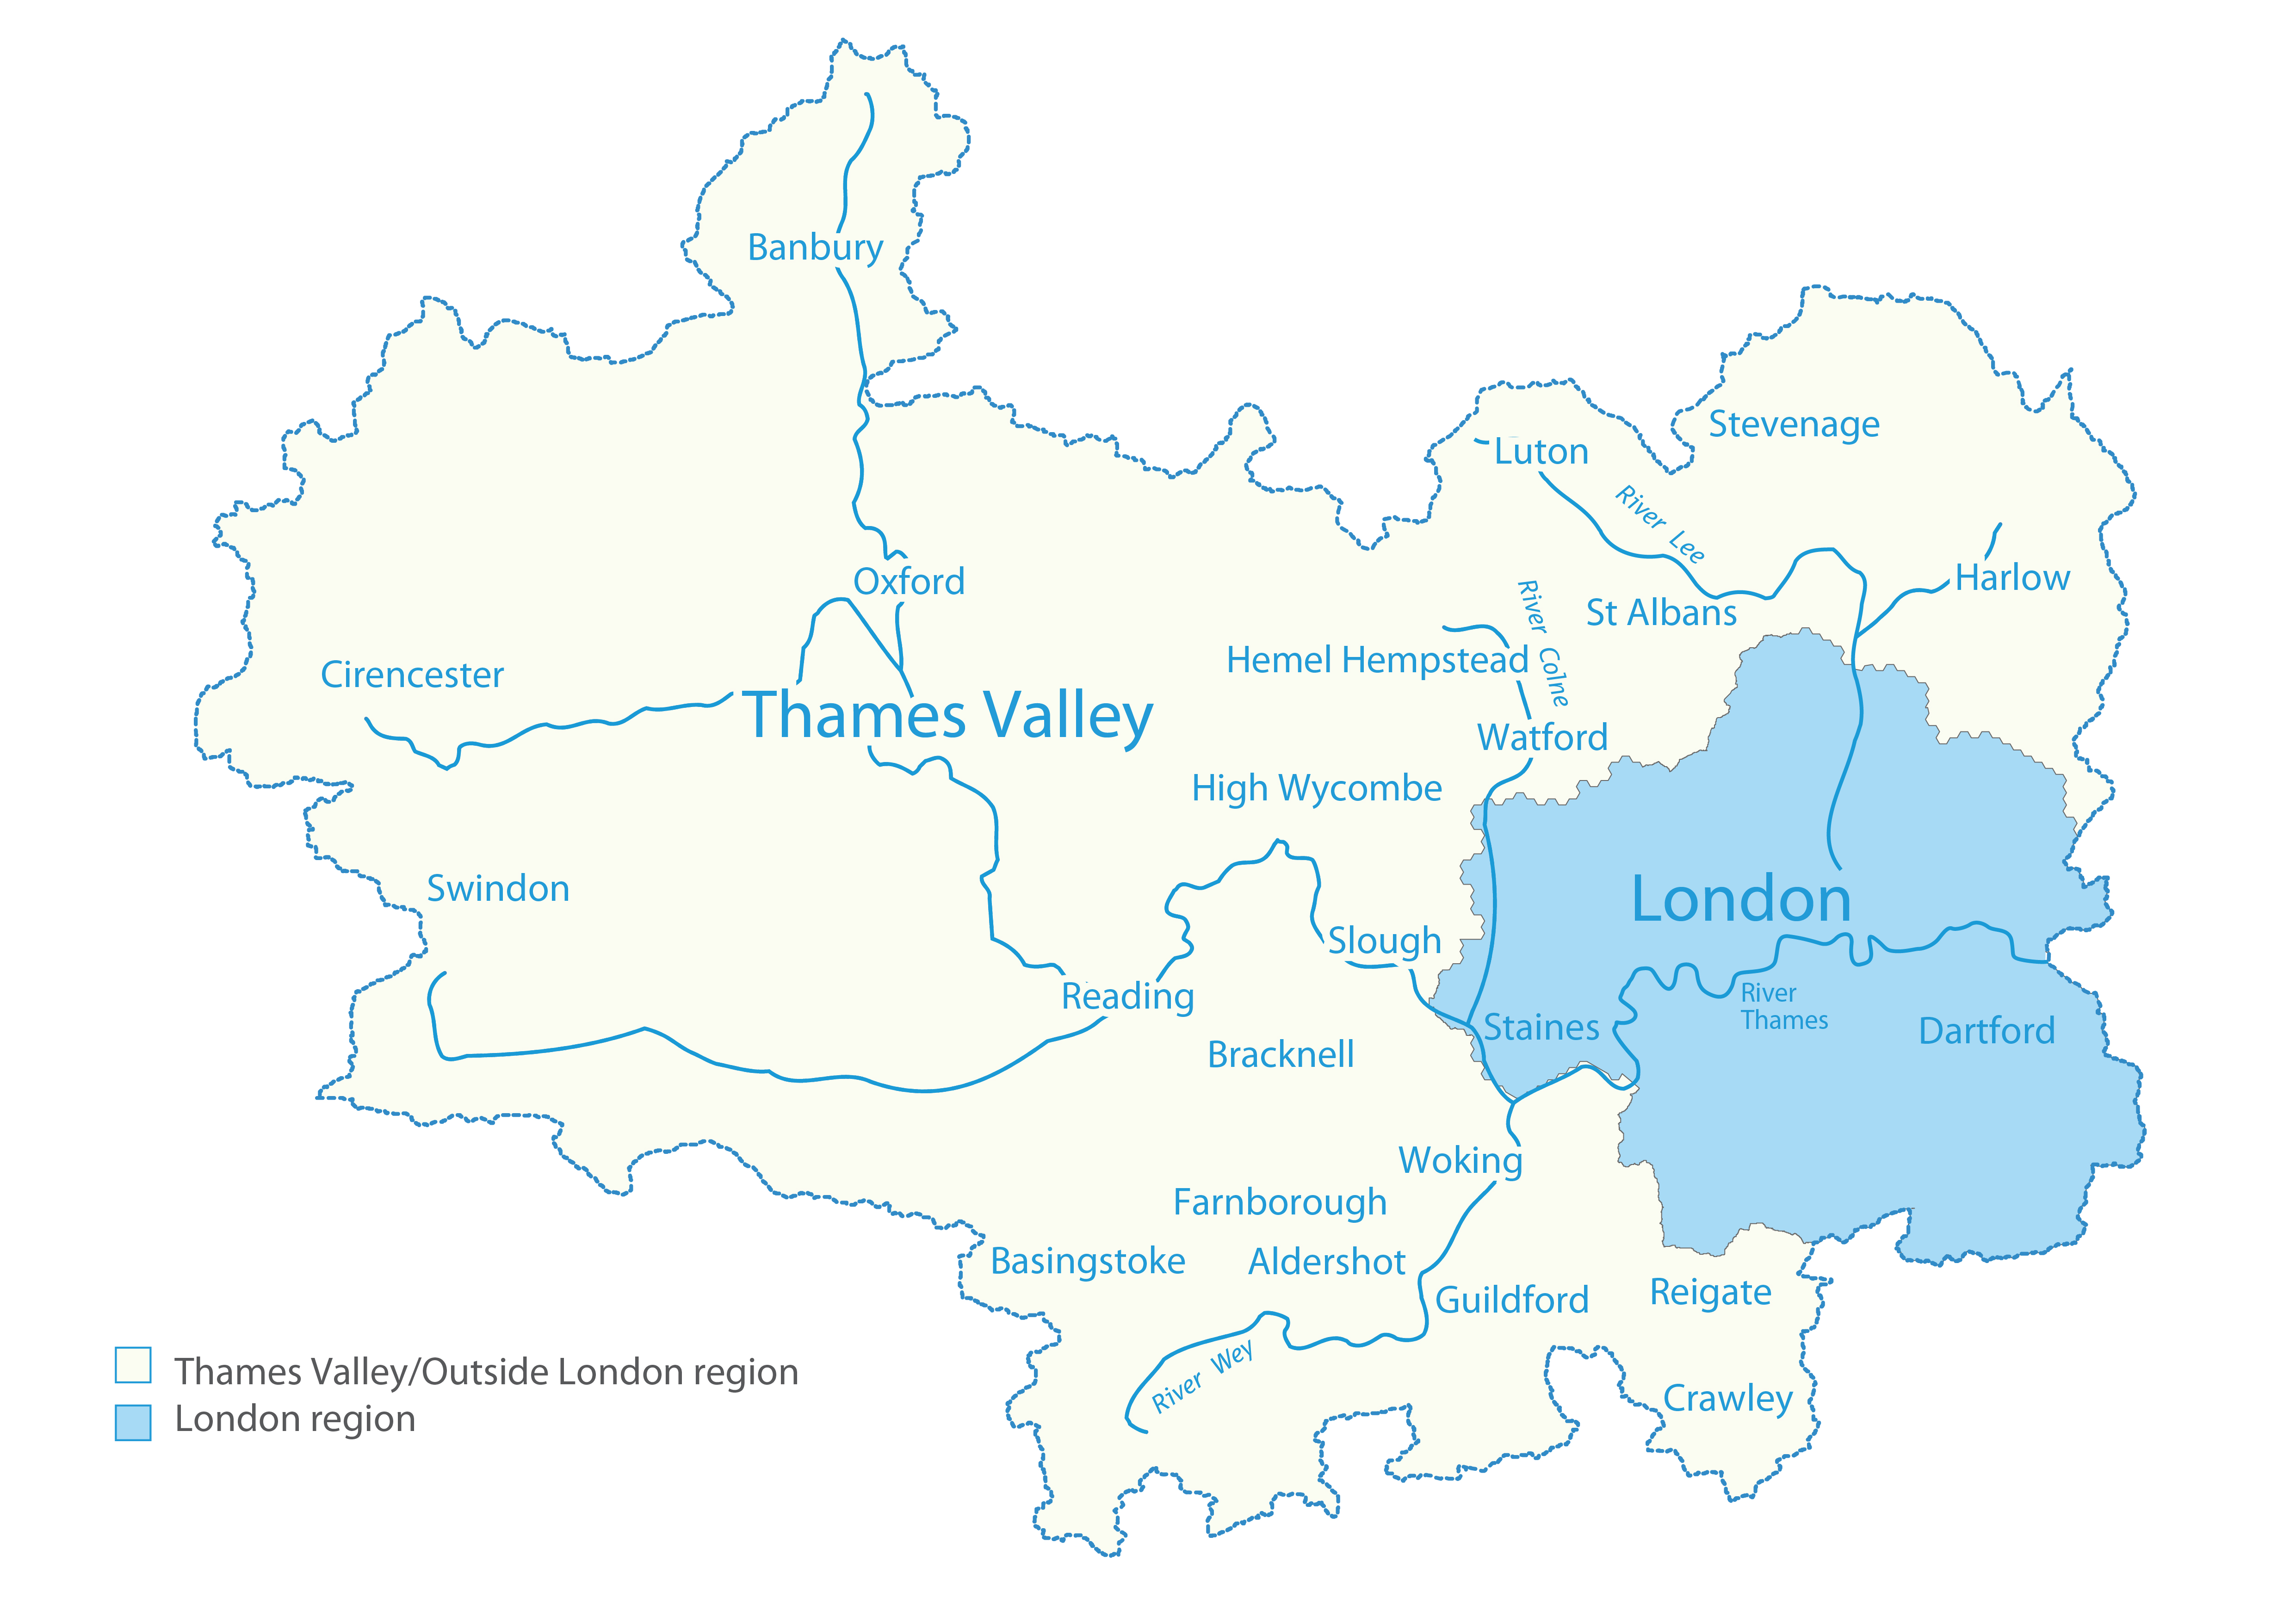 A map showing the wastewater area covered by Thames Water.